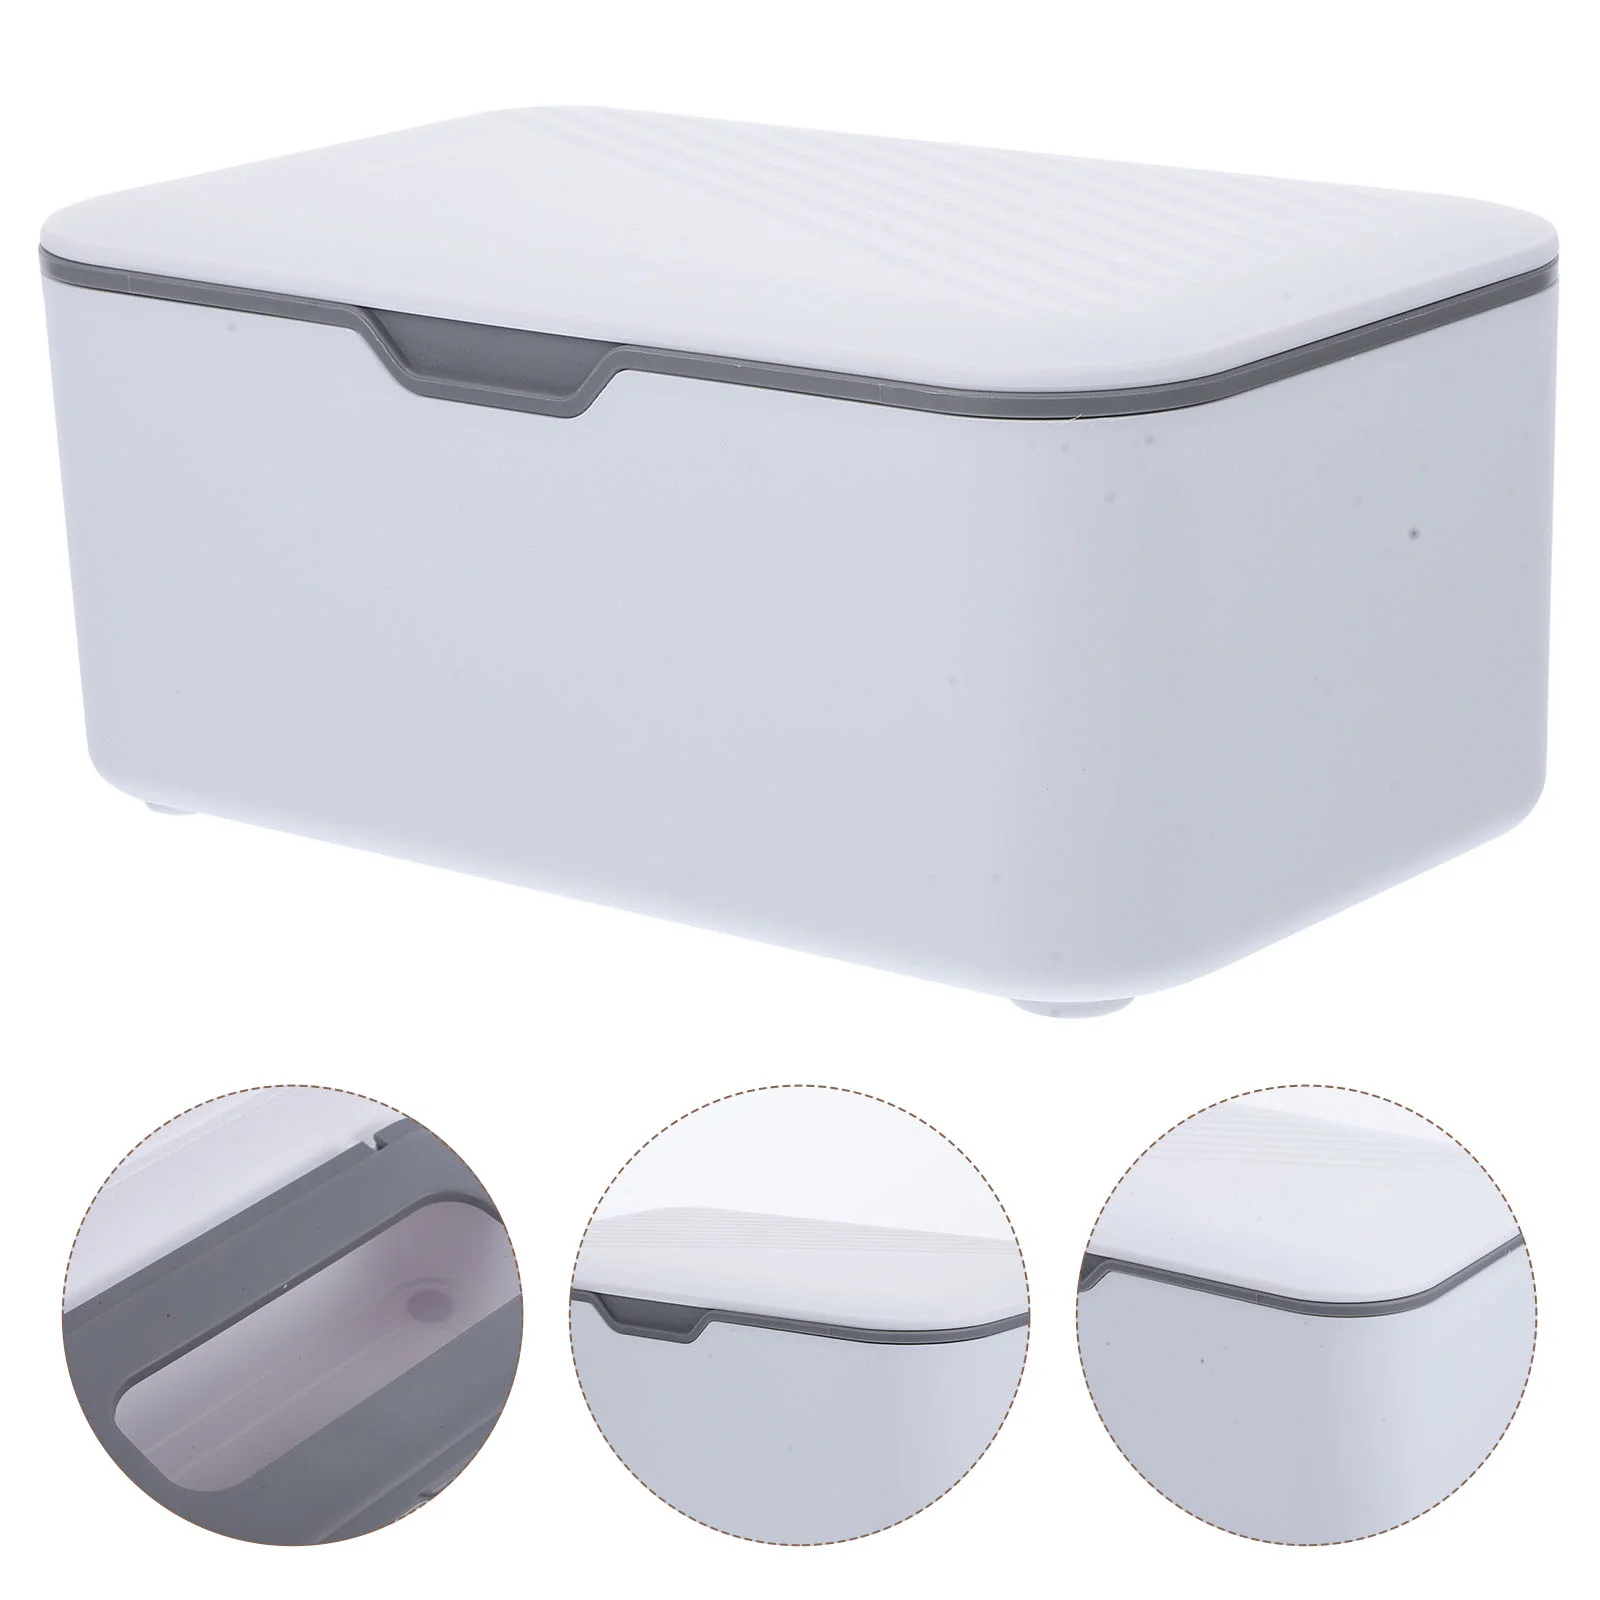 Wipe Box Wipes Dispenser Case Napkin Holder Bathroom Organizer Bins Container Plastic Tissue Boxes Bulk of tissue case box container pu leather chic marble pattern home car towel napkin papers bag holder box case pouch table decoration